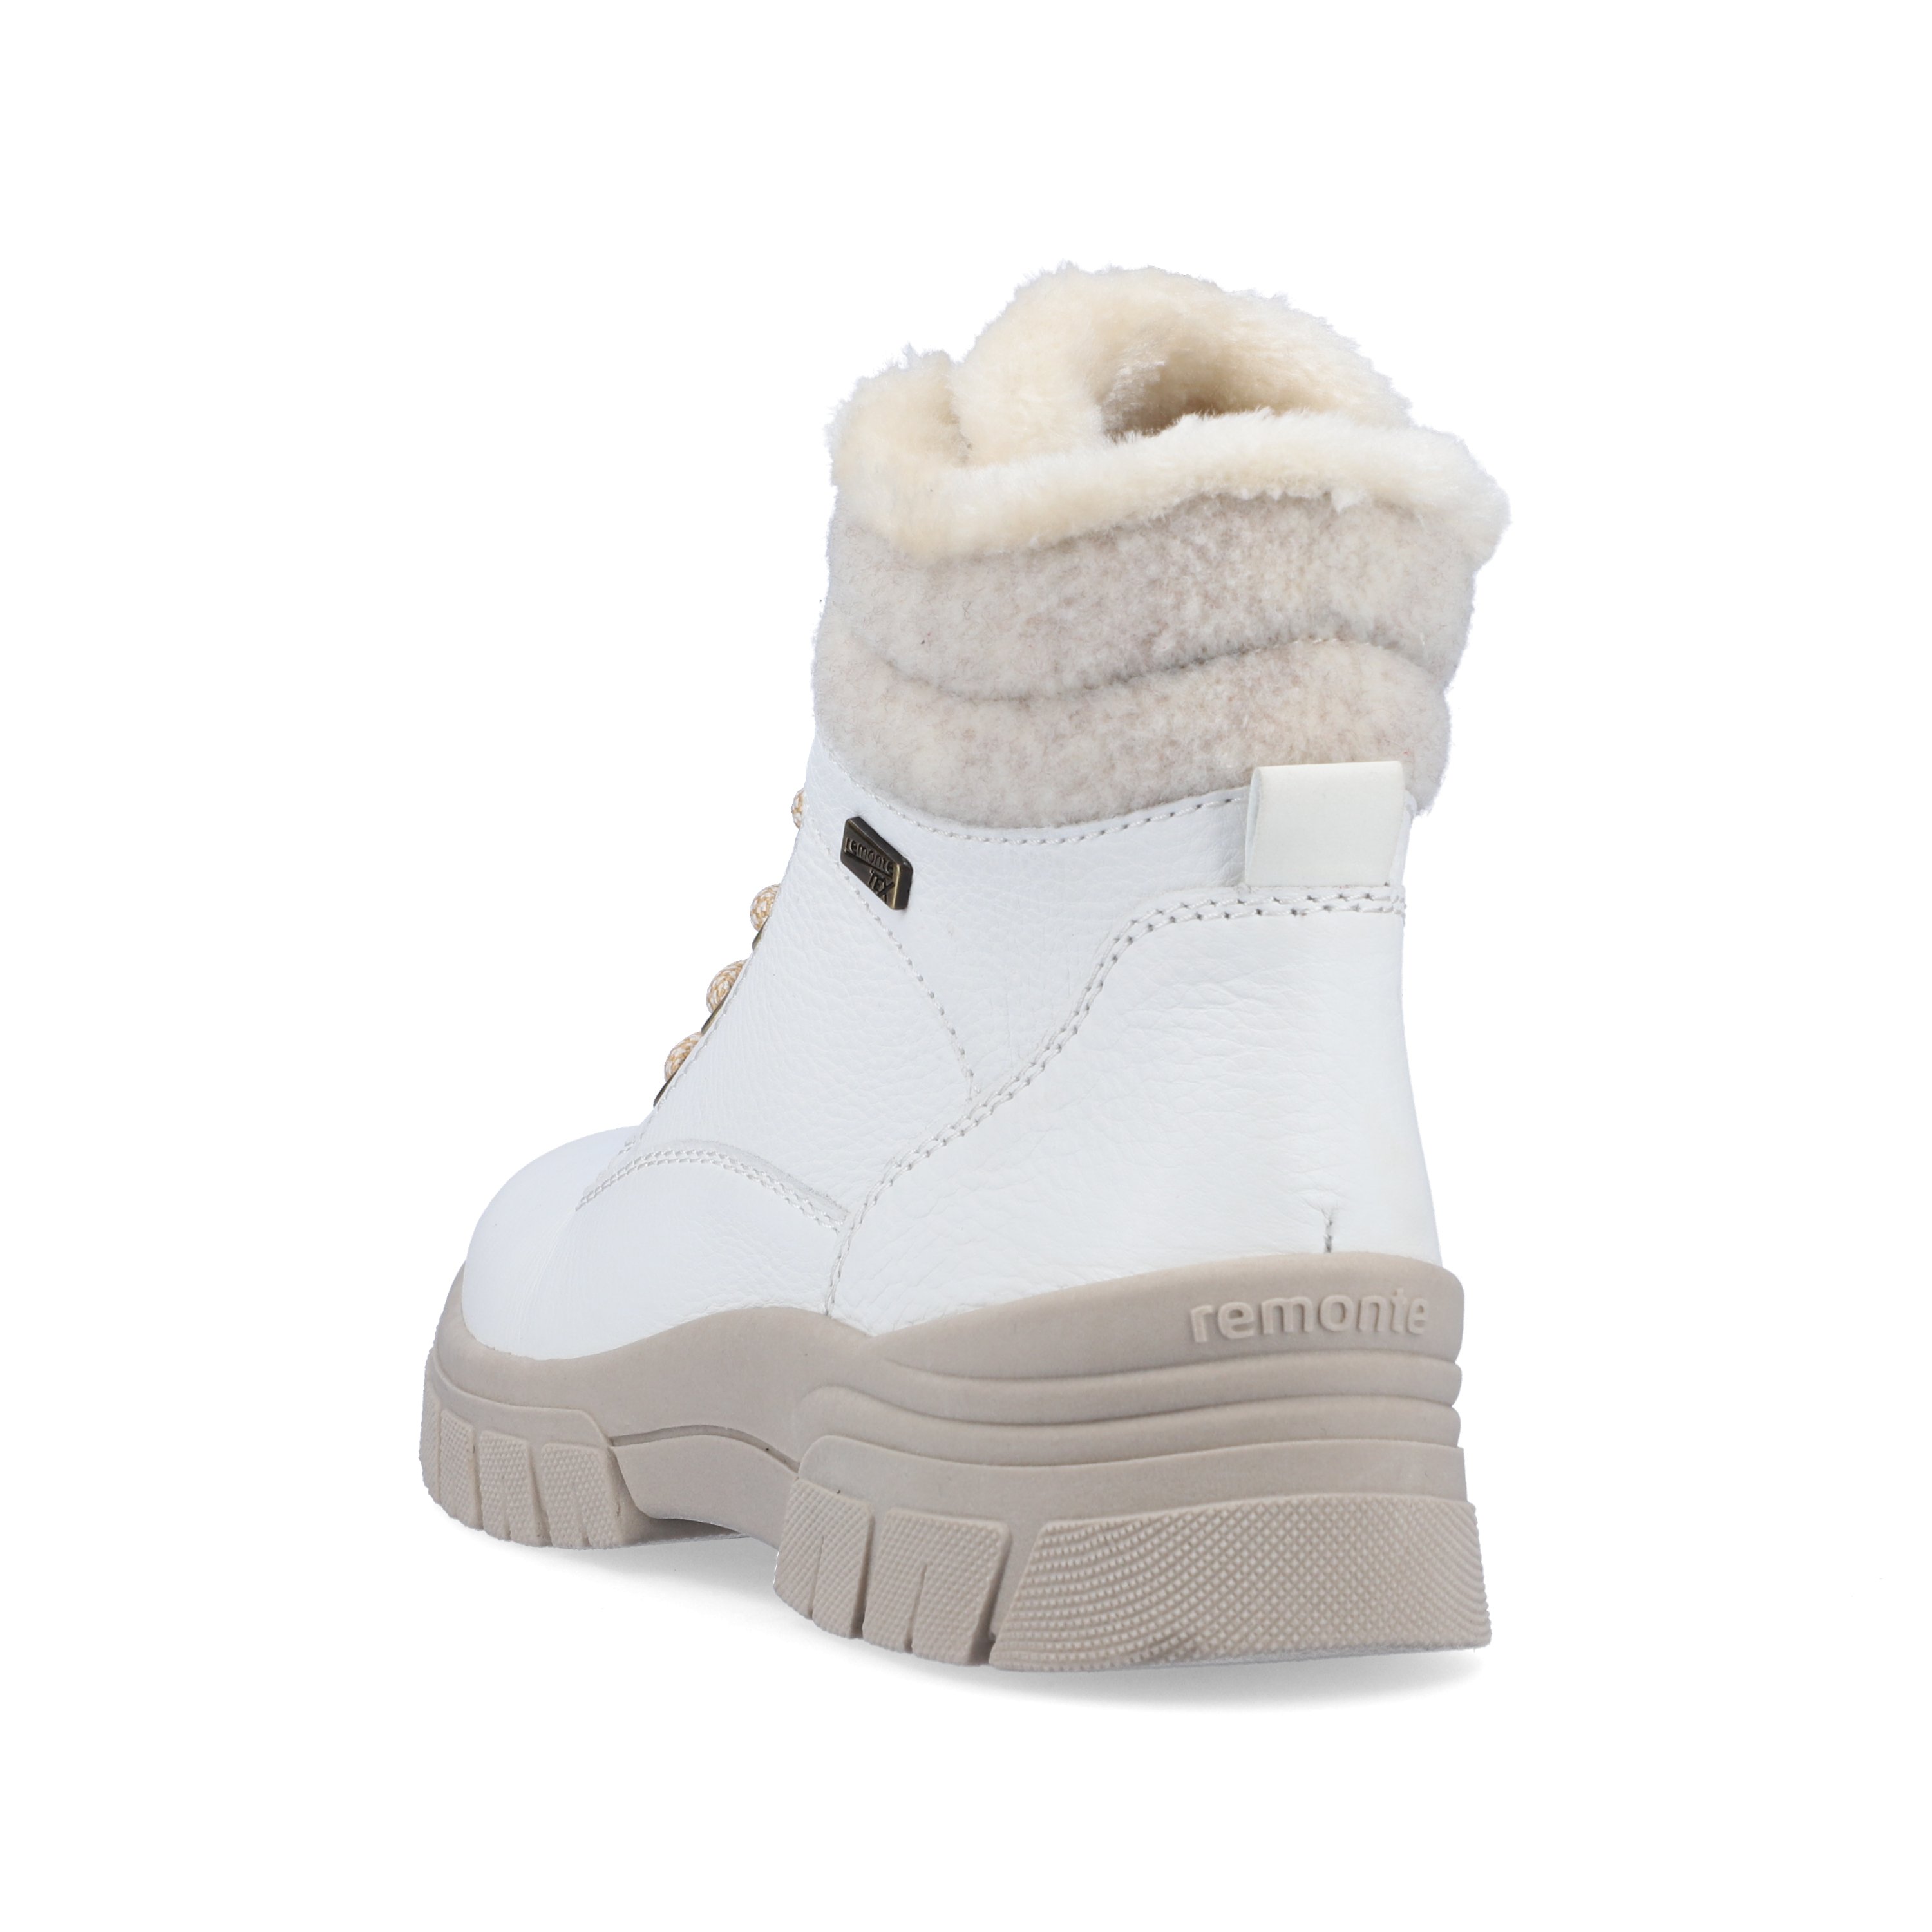 Off-white remonte women´s lace-up boots D0E71-80 with lacing and zipper. Shoe from the back